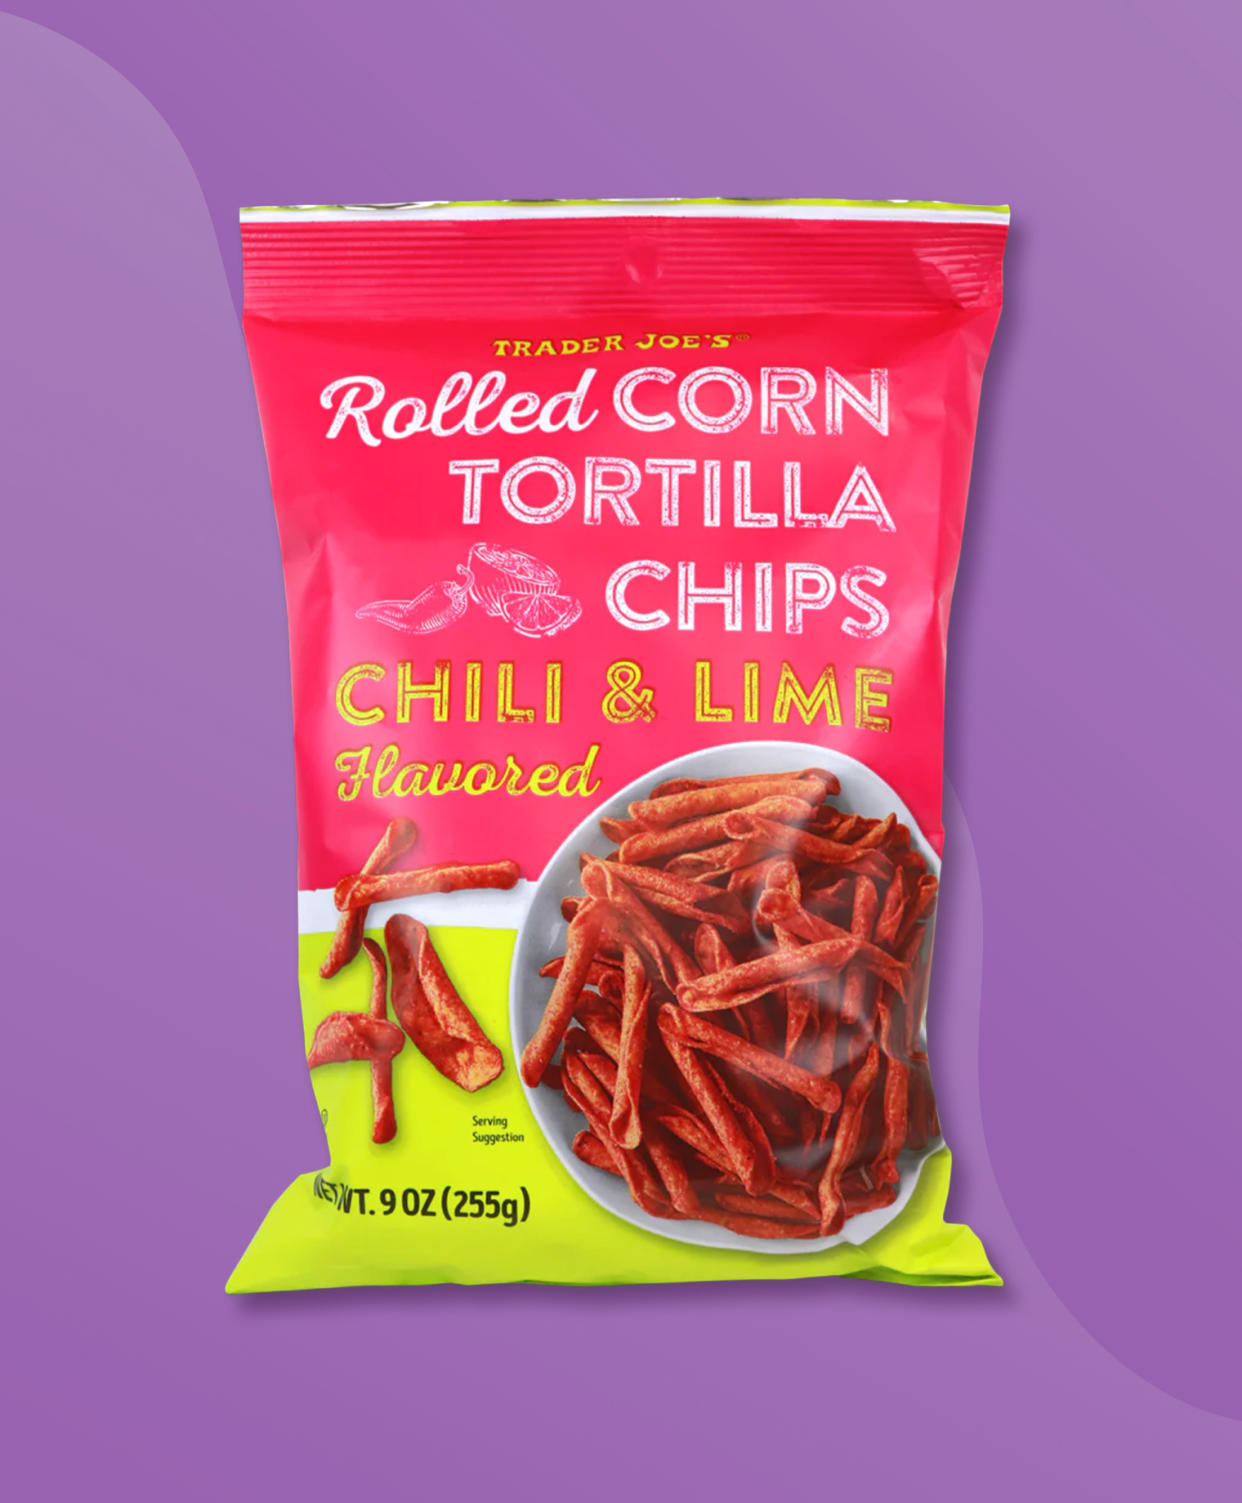 A bag of Trader Joe's Chili & Lime Flavored Rolled Corn Tortilla Chips on a purple background. (TODAY Illustration / Lauren Schatzman / Trader Joe's)